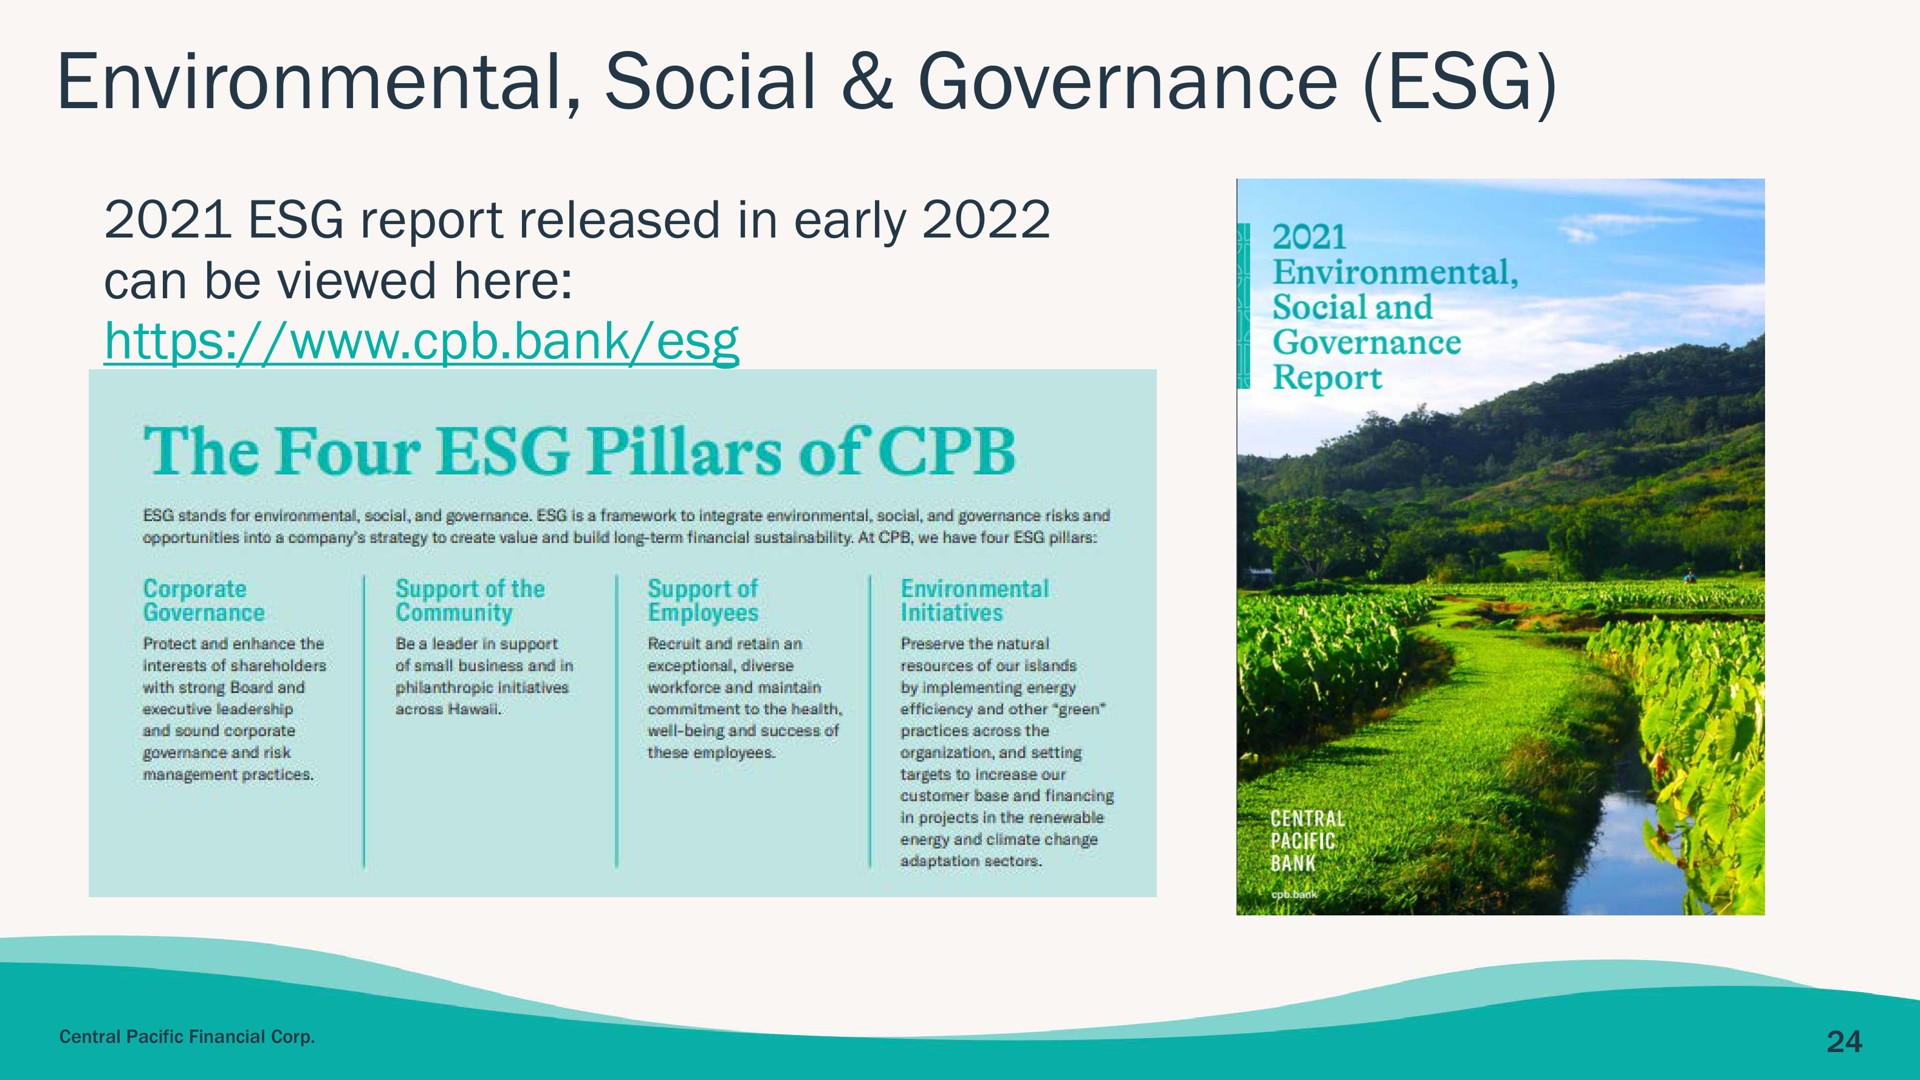 environmental social governance report released in early can be viewed here the four pillars of | Central Pacific Financial